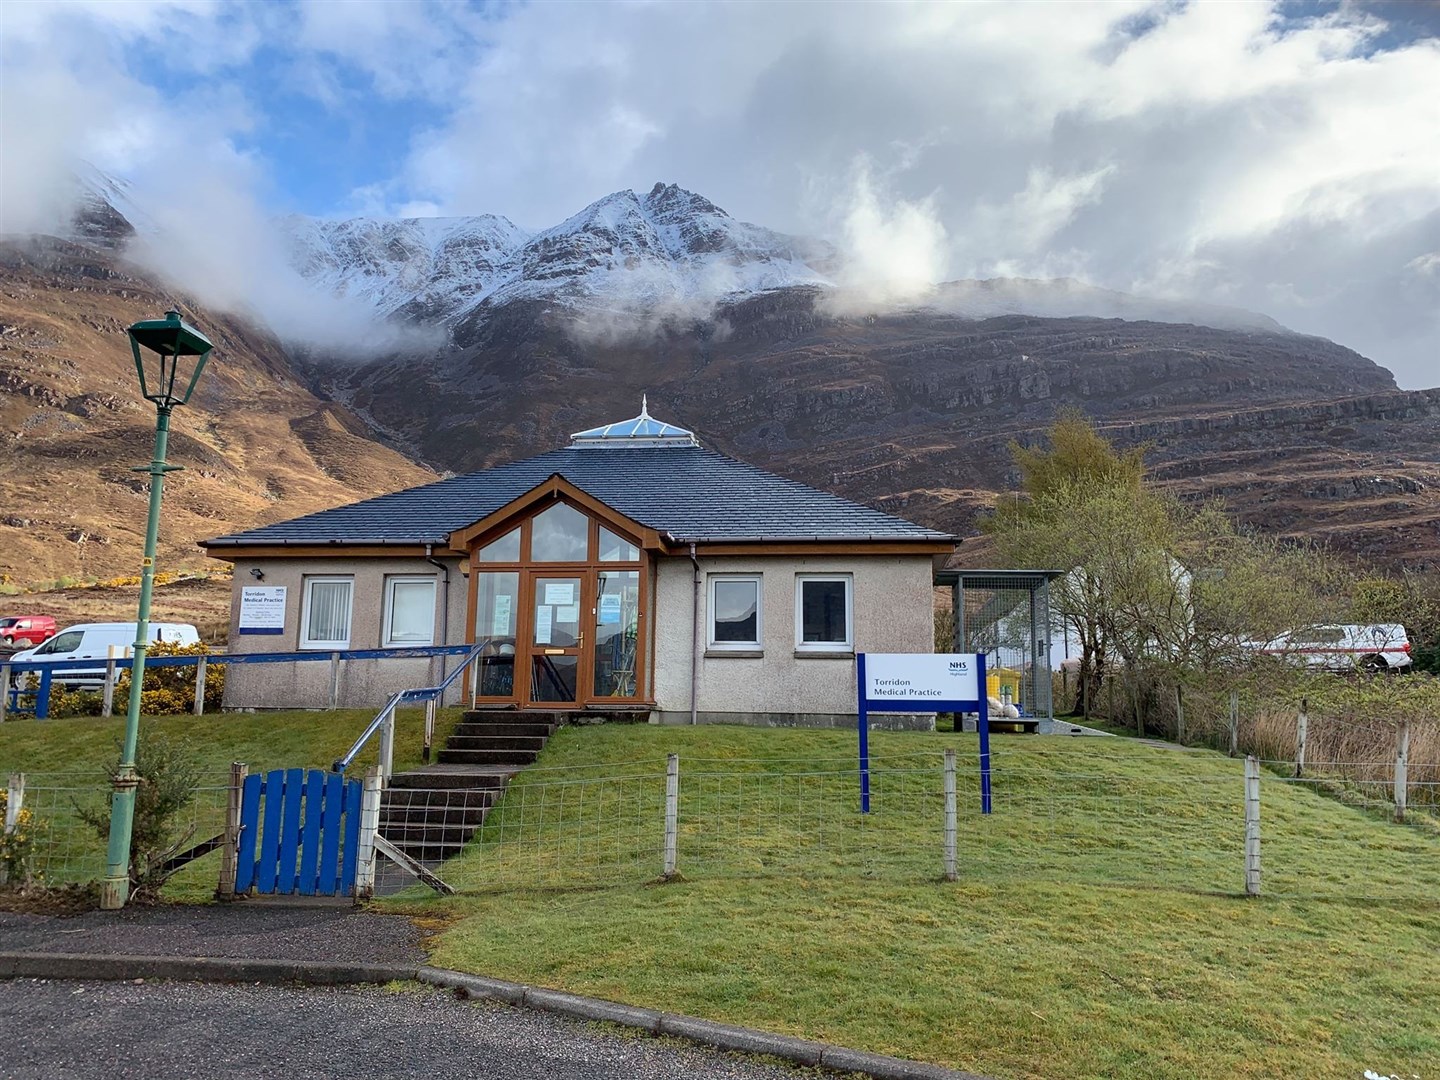 Torridon Medical Practice boasts a stunning location in Wester Ross. Picture: Torridon Medical Practice